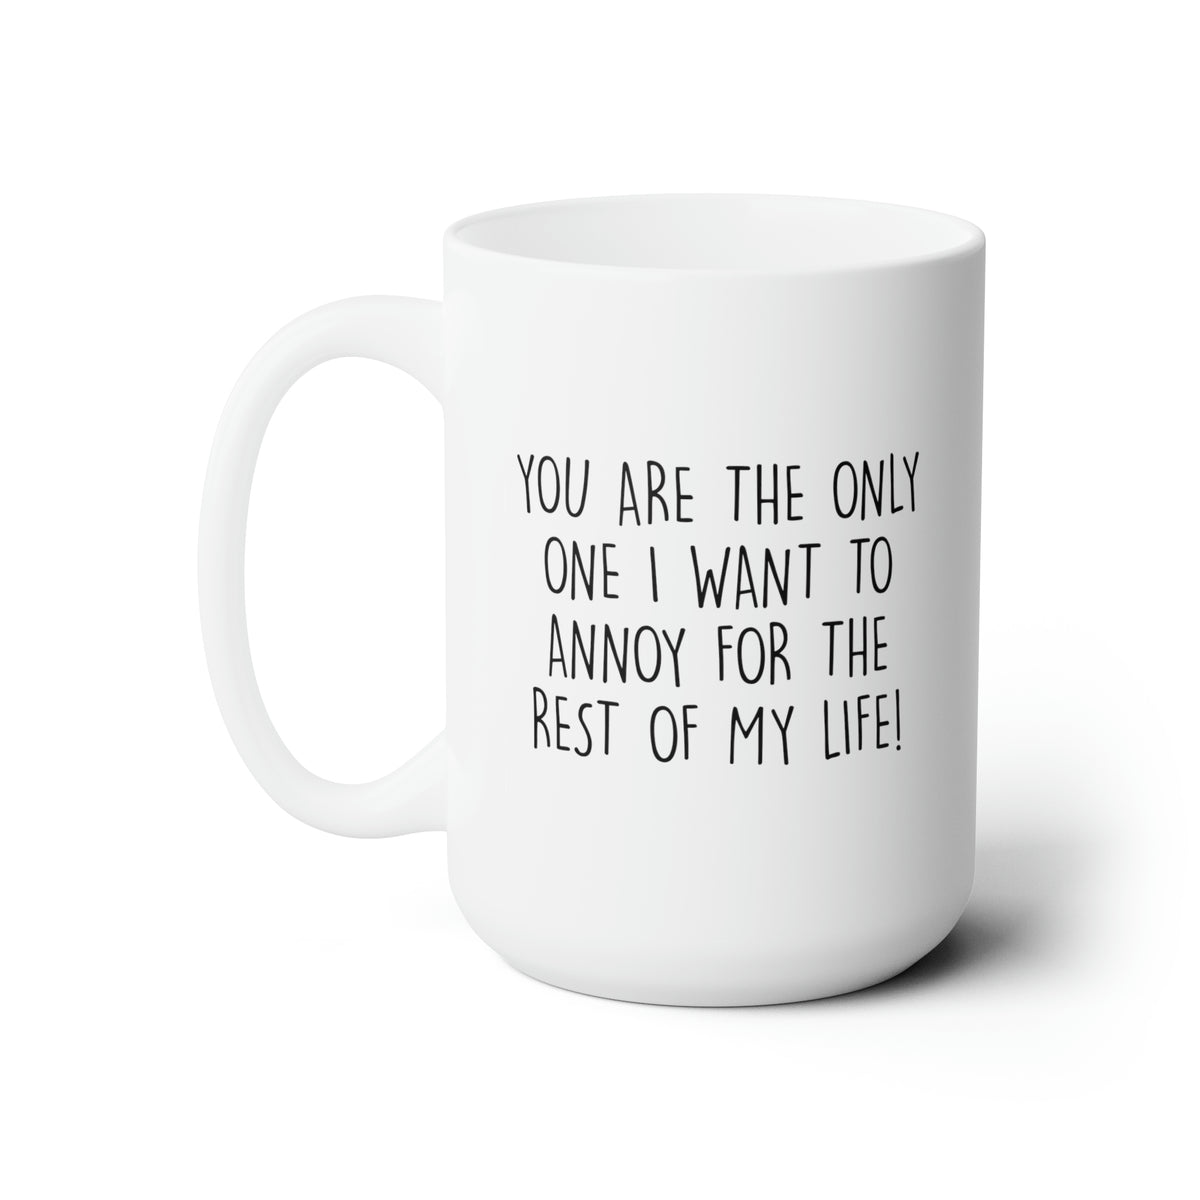 Cute Gifts for Wife and Husband, You Are The Only One I Want To Annoy For The Rest Of My Life, Funny 15oz Coffee Mug For Him Her, Love Cup For Wife Husband Girlfriend Boyfriend